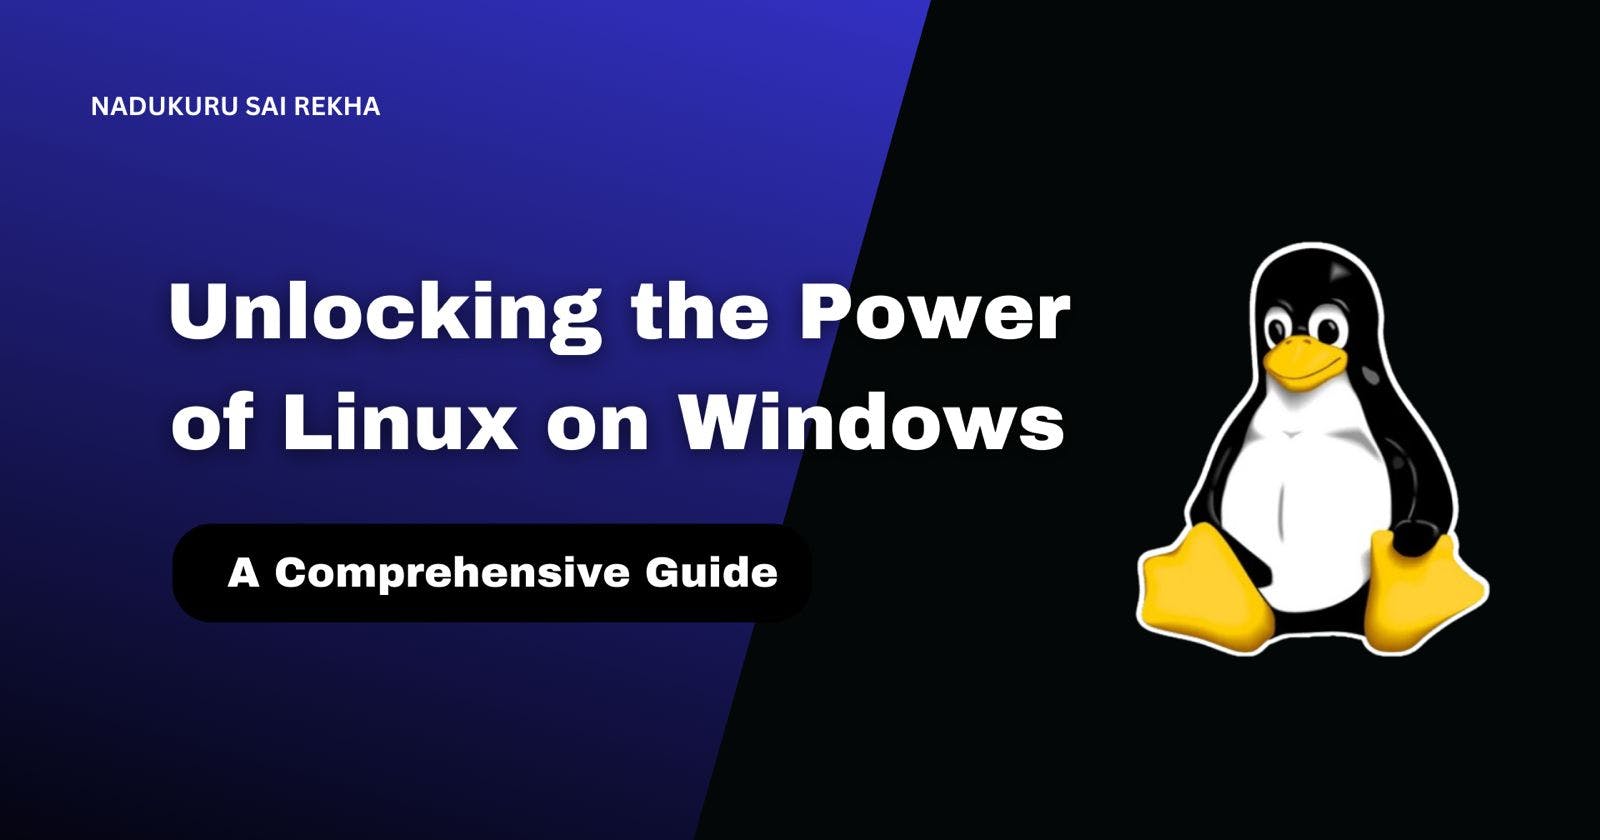 Unlocking the Power of Linux on Windows: A Comprehensive Guide to Installing WSL